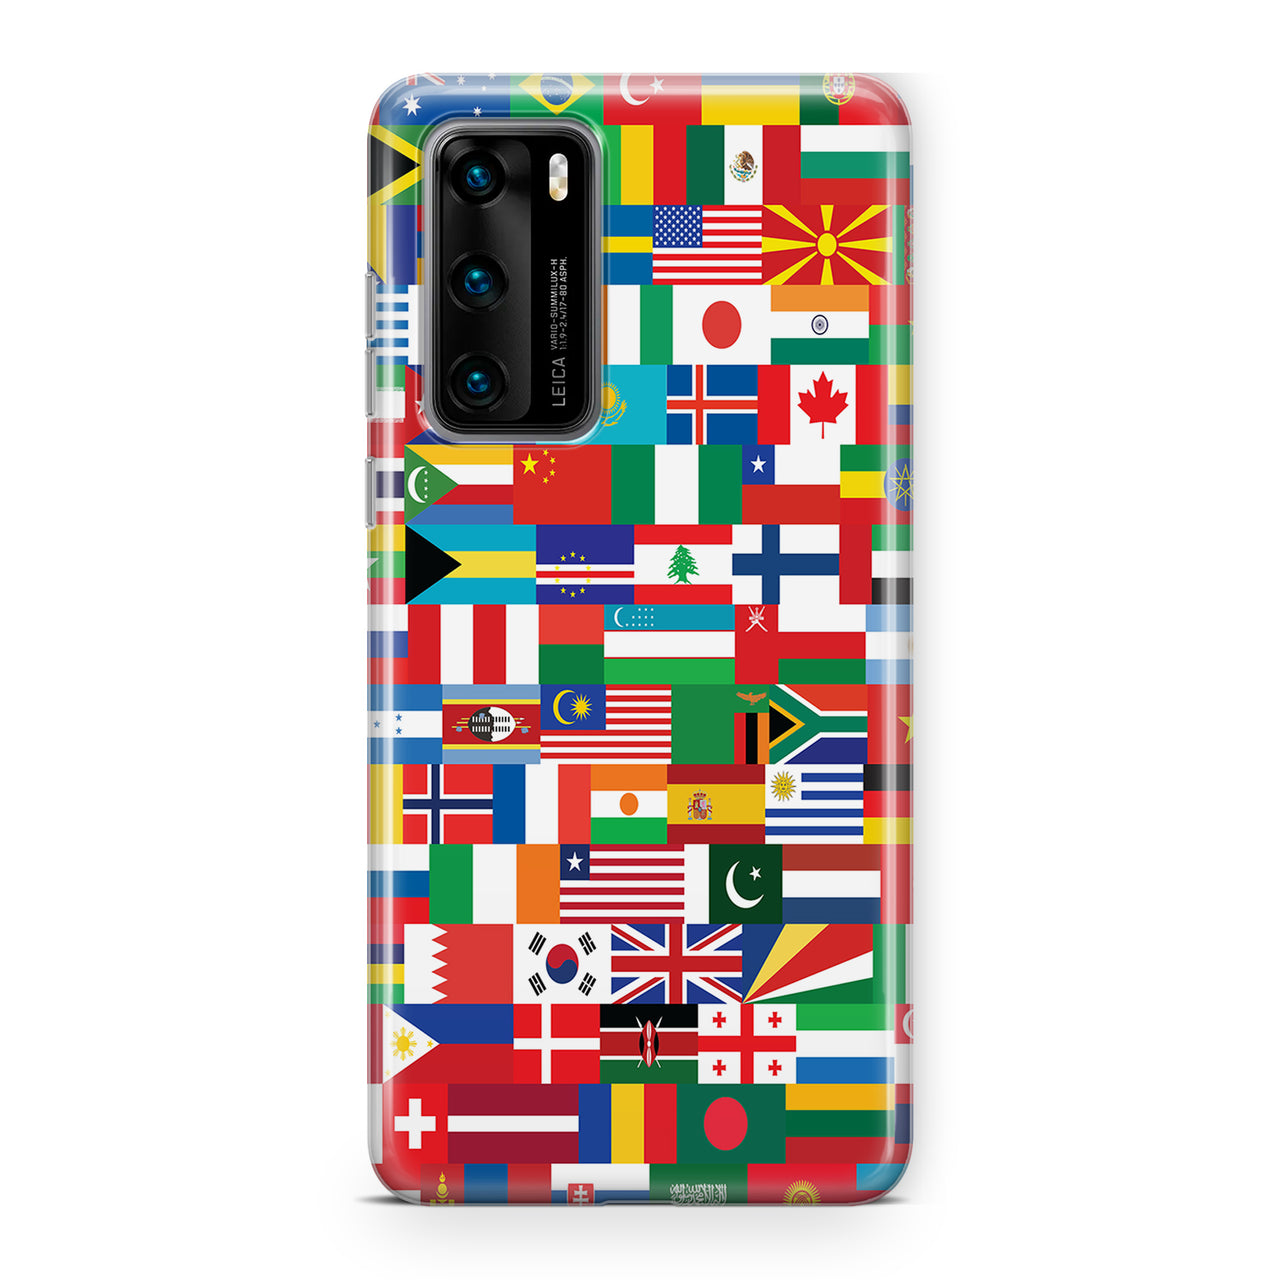 World Flags Designed Huawei Cases